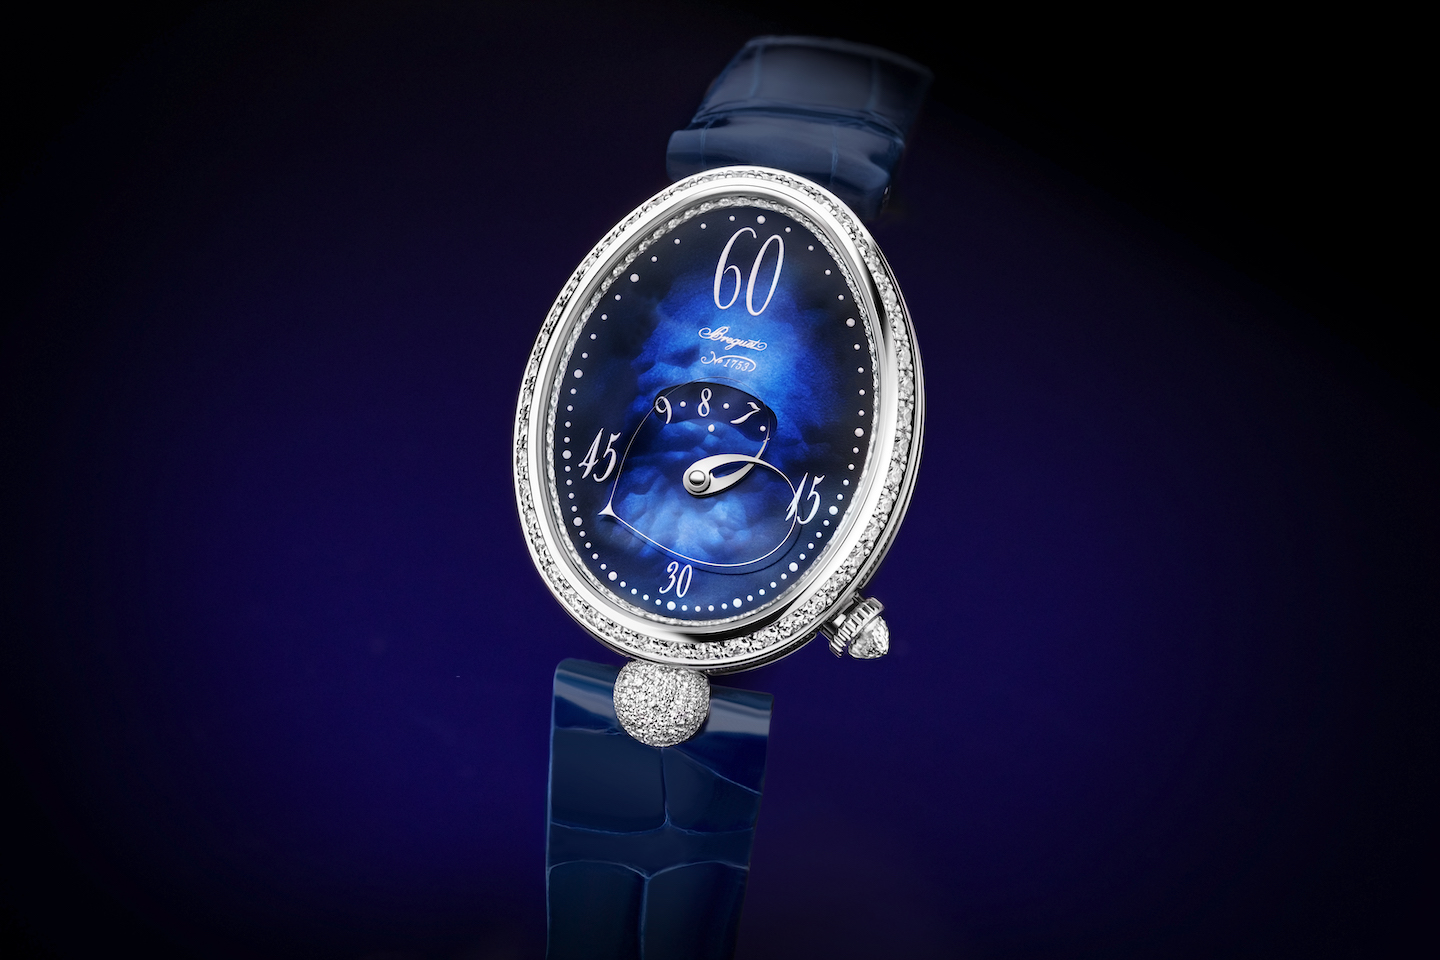 Breguet Reines de Naples watch with morphing heart hand to indicate the minutes. 